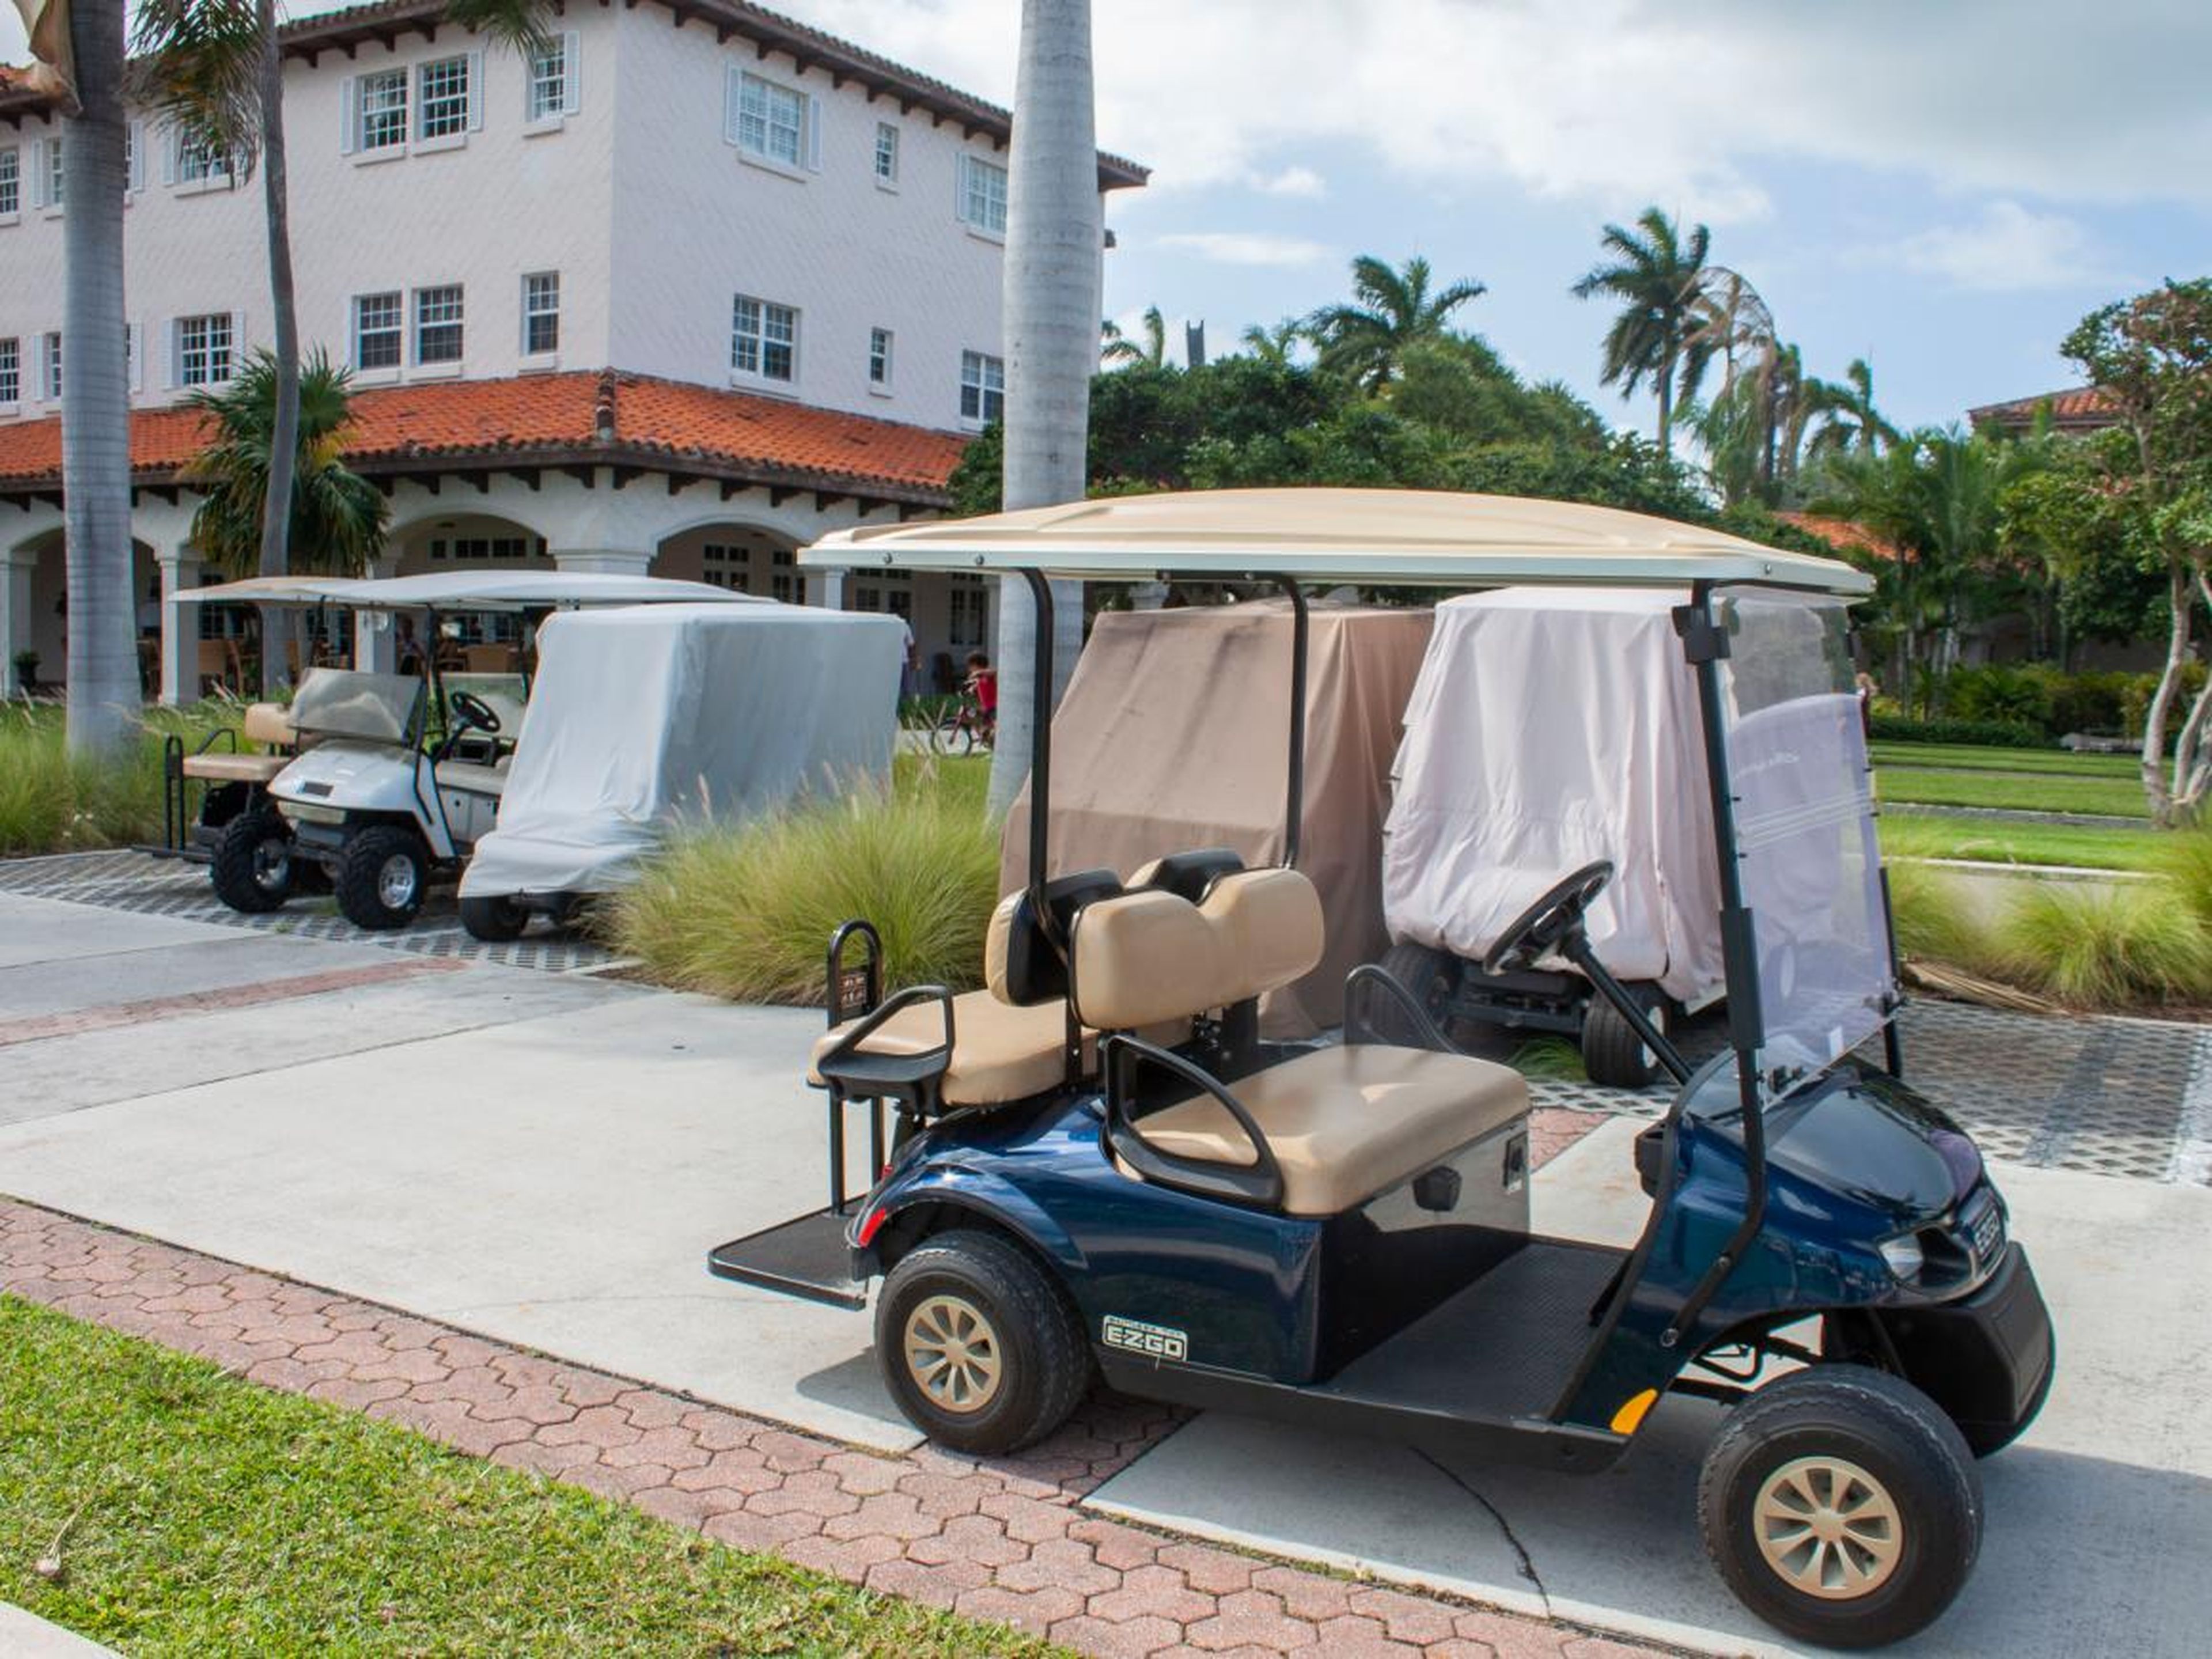 I was picked up in a golf cart, which is the preferred mode of transportation on the island.